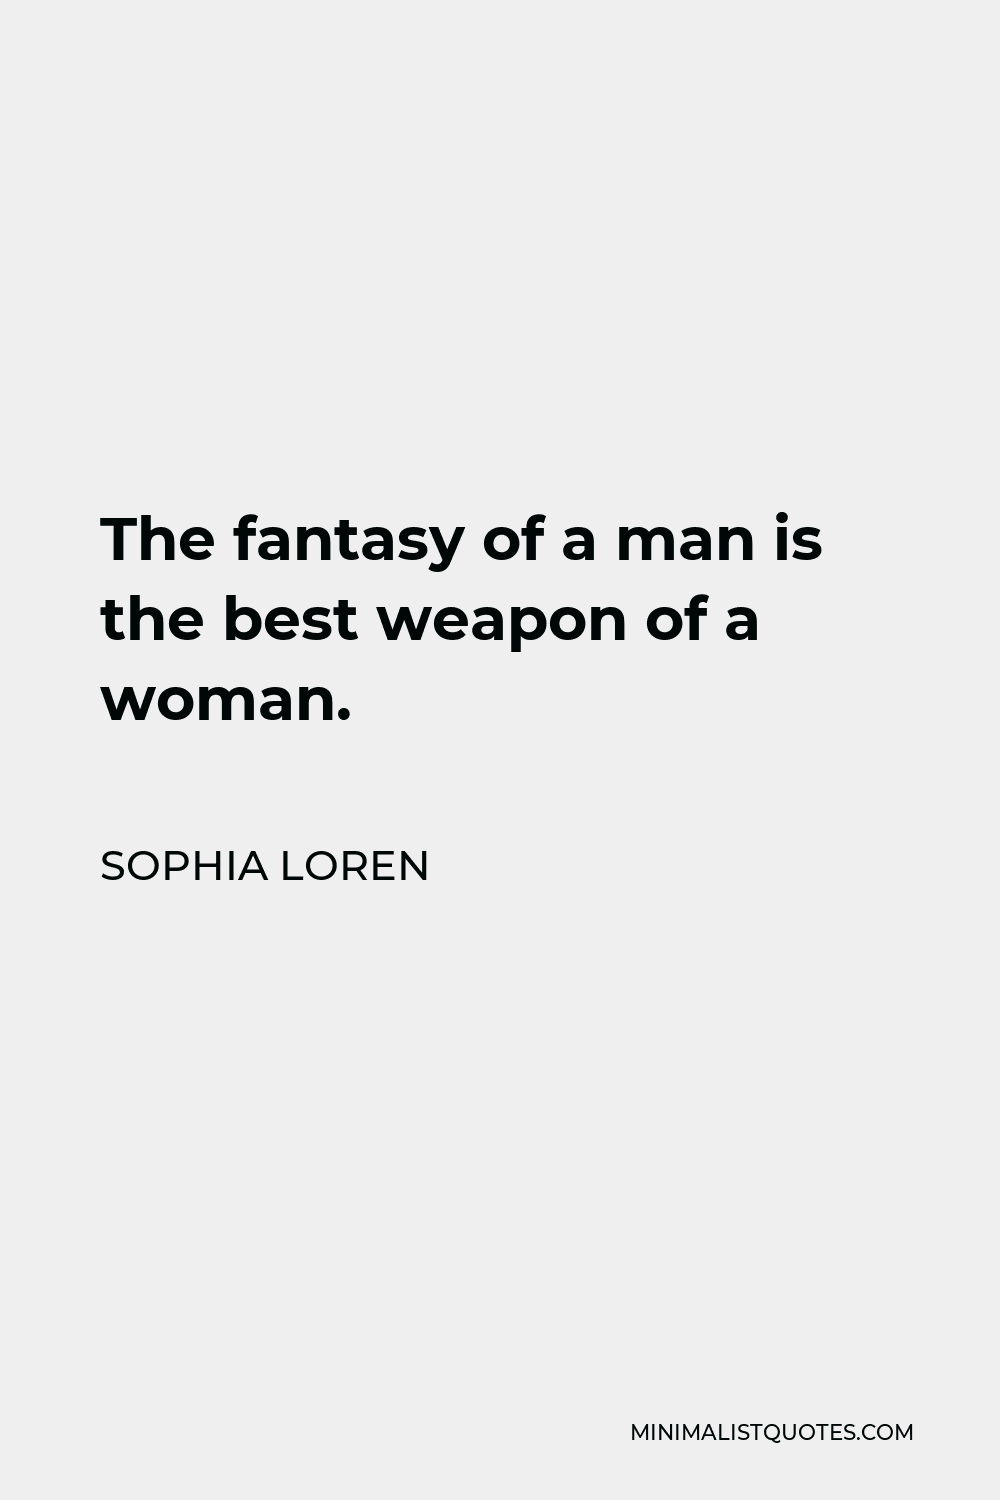 Sophia Loren Quote - The fantasy of a man is the best weapon of a woman.